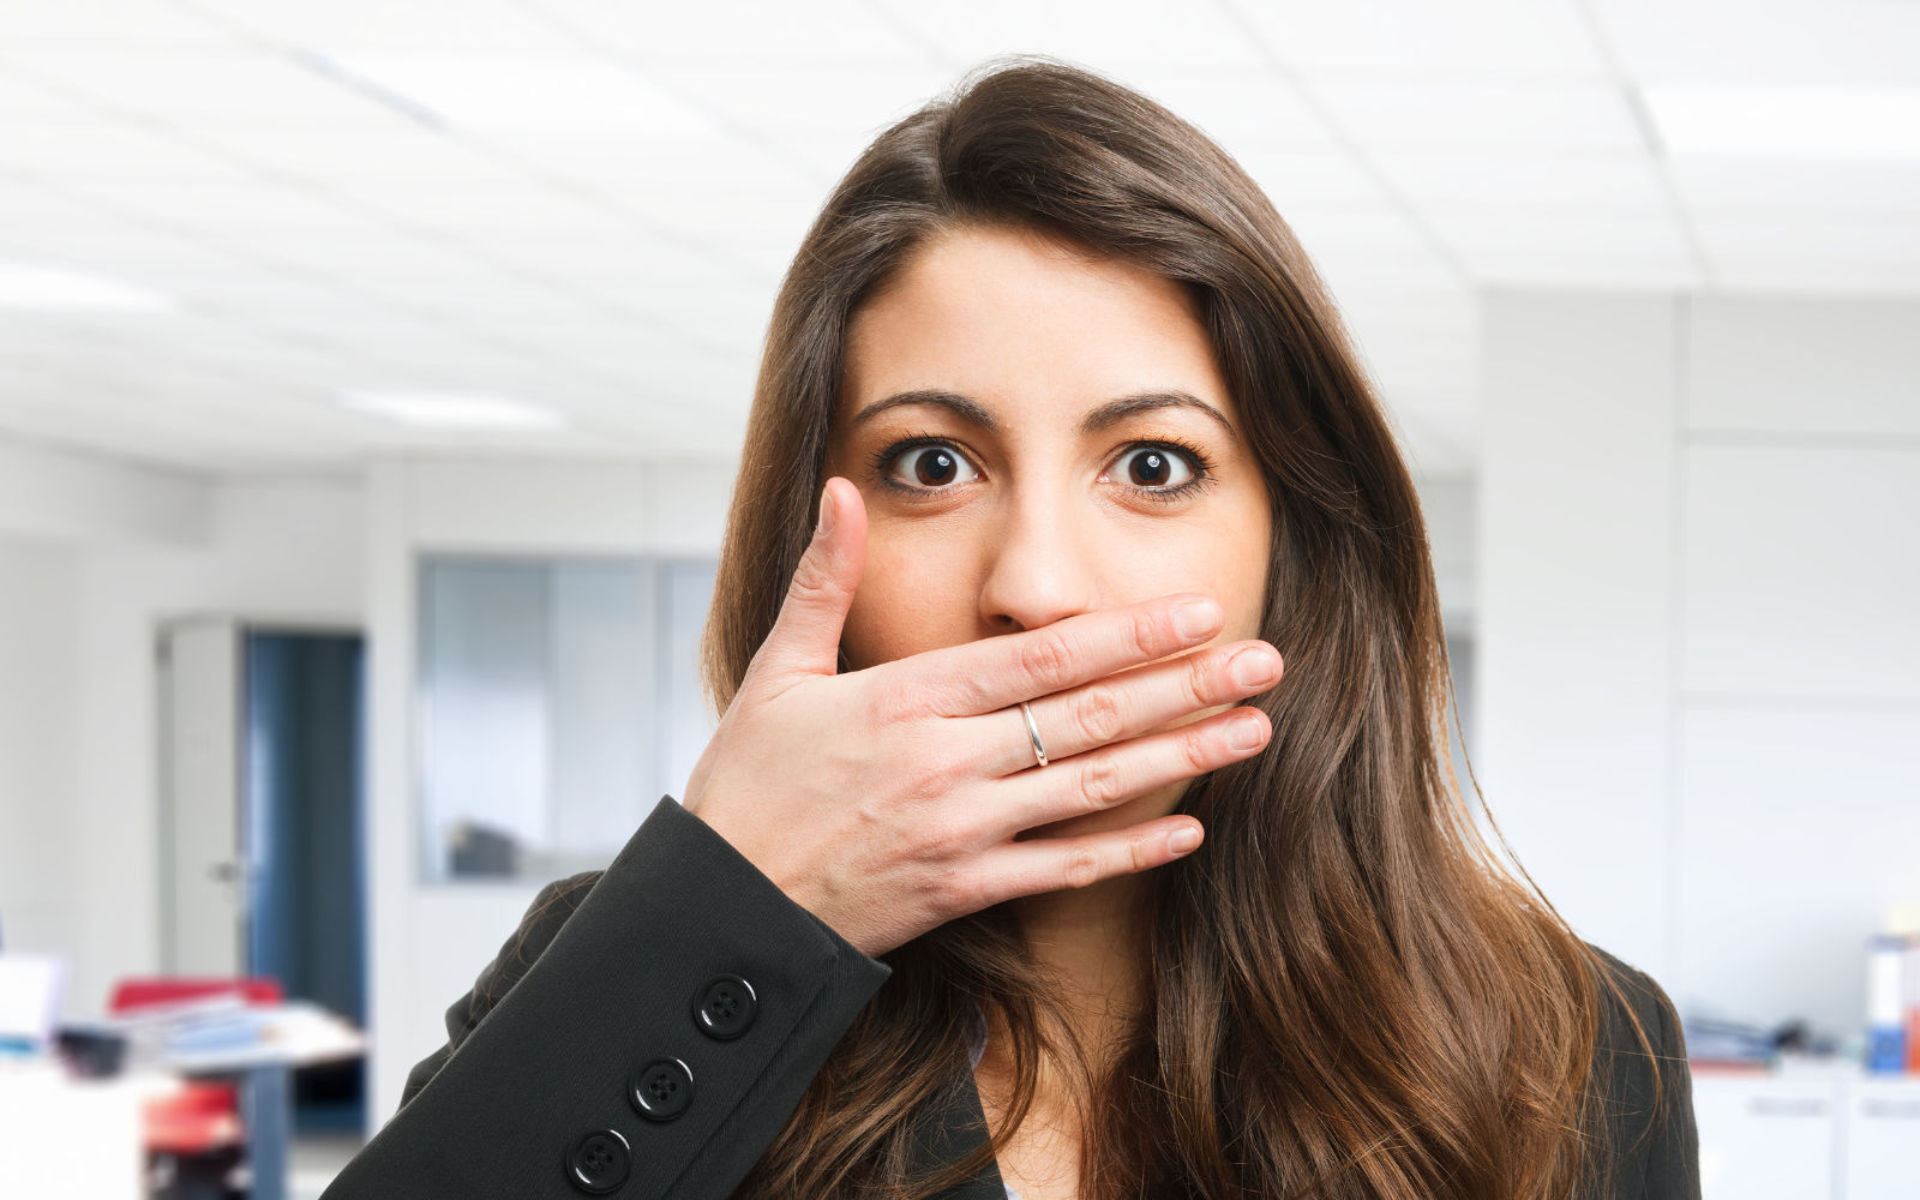 A concerned woman covering her mouth with a hand due to bad breath.